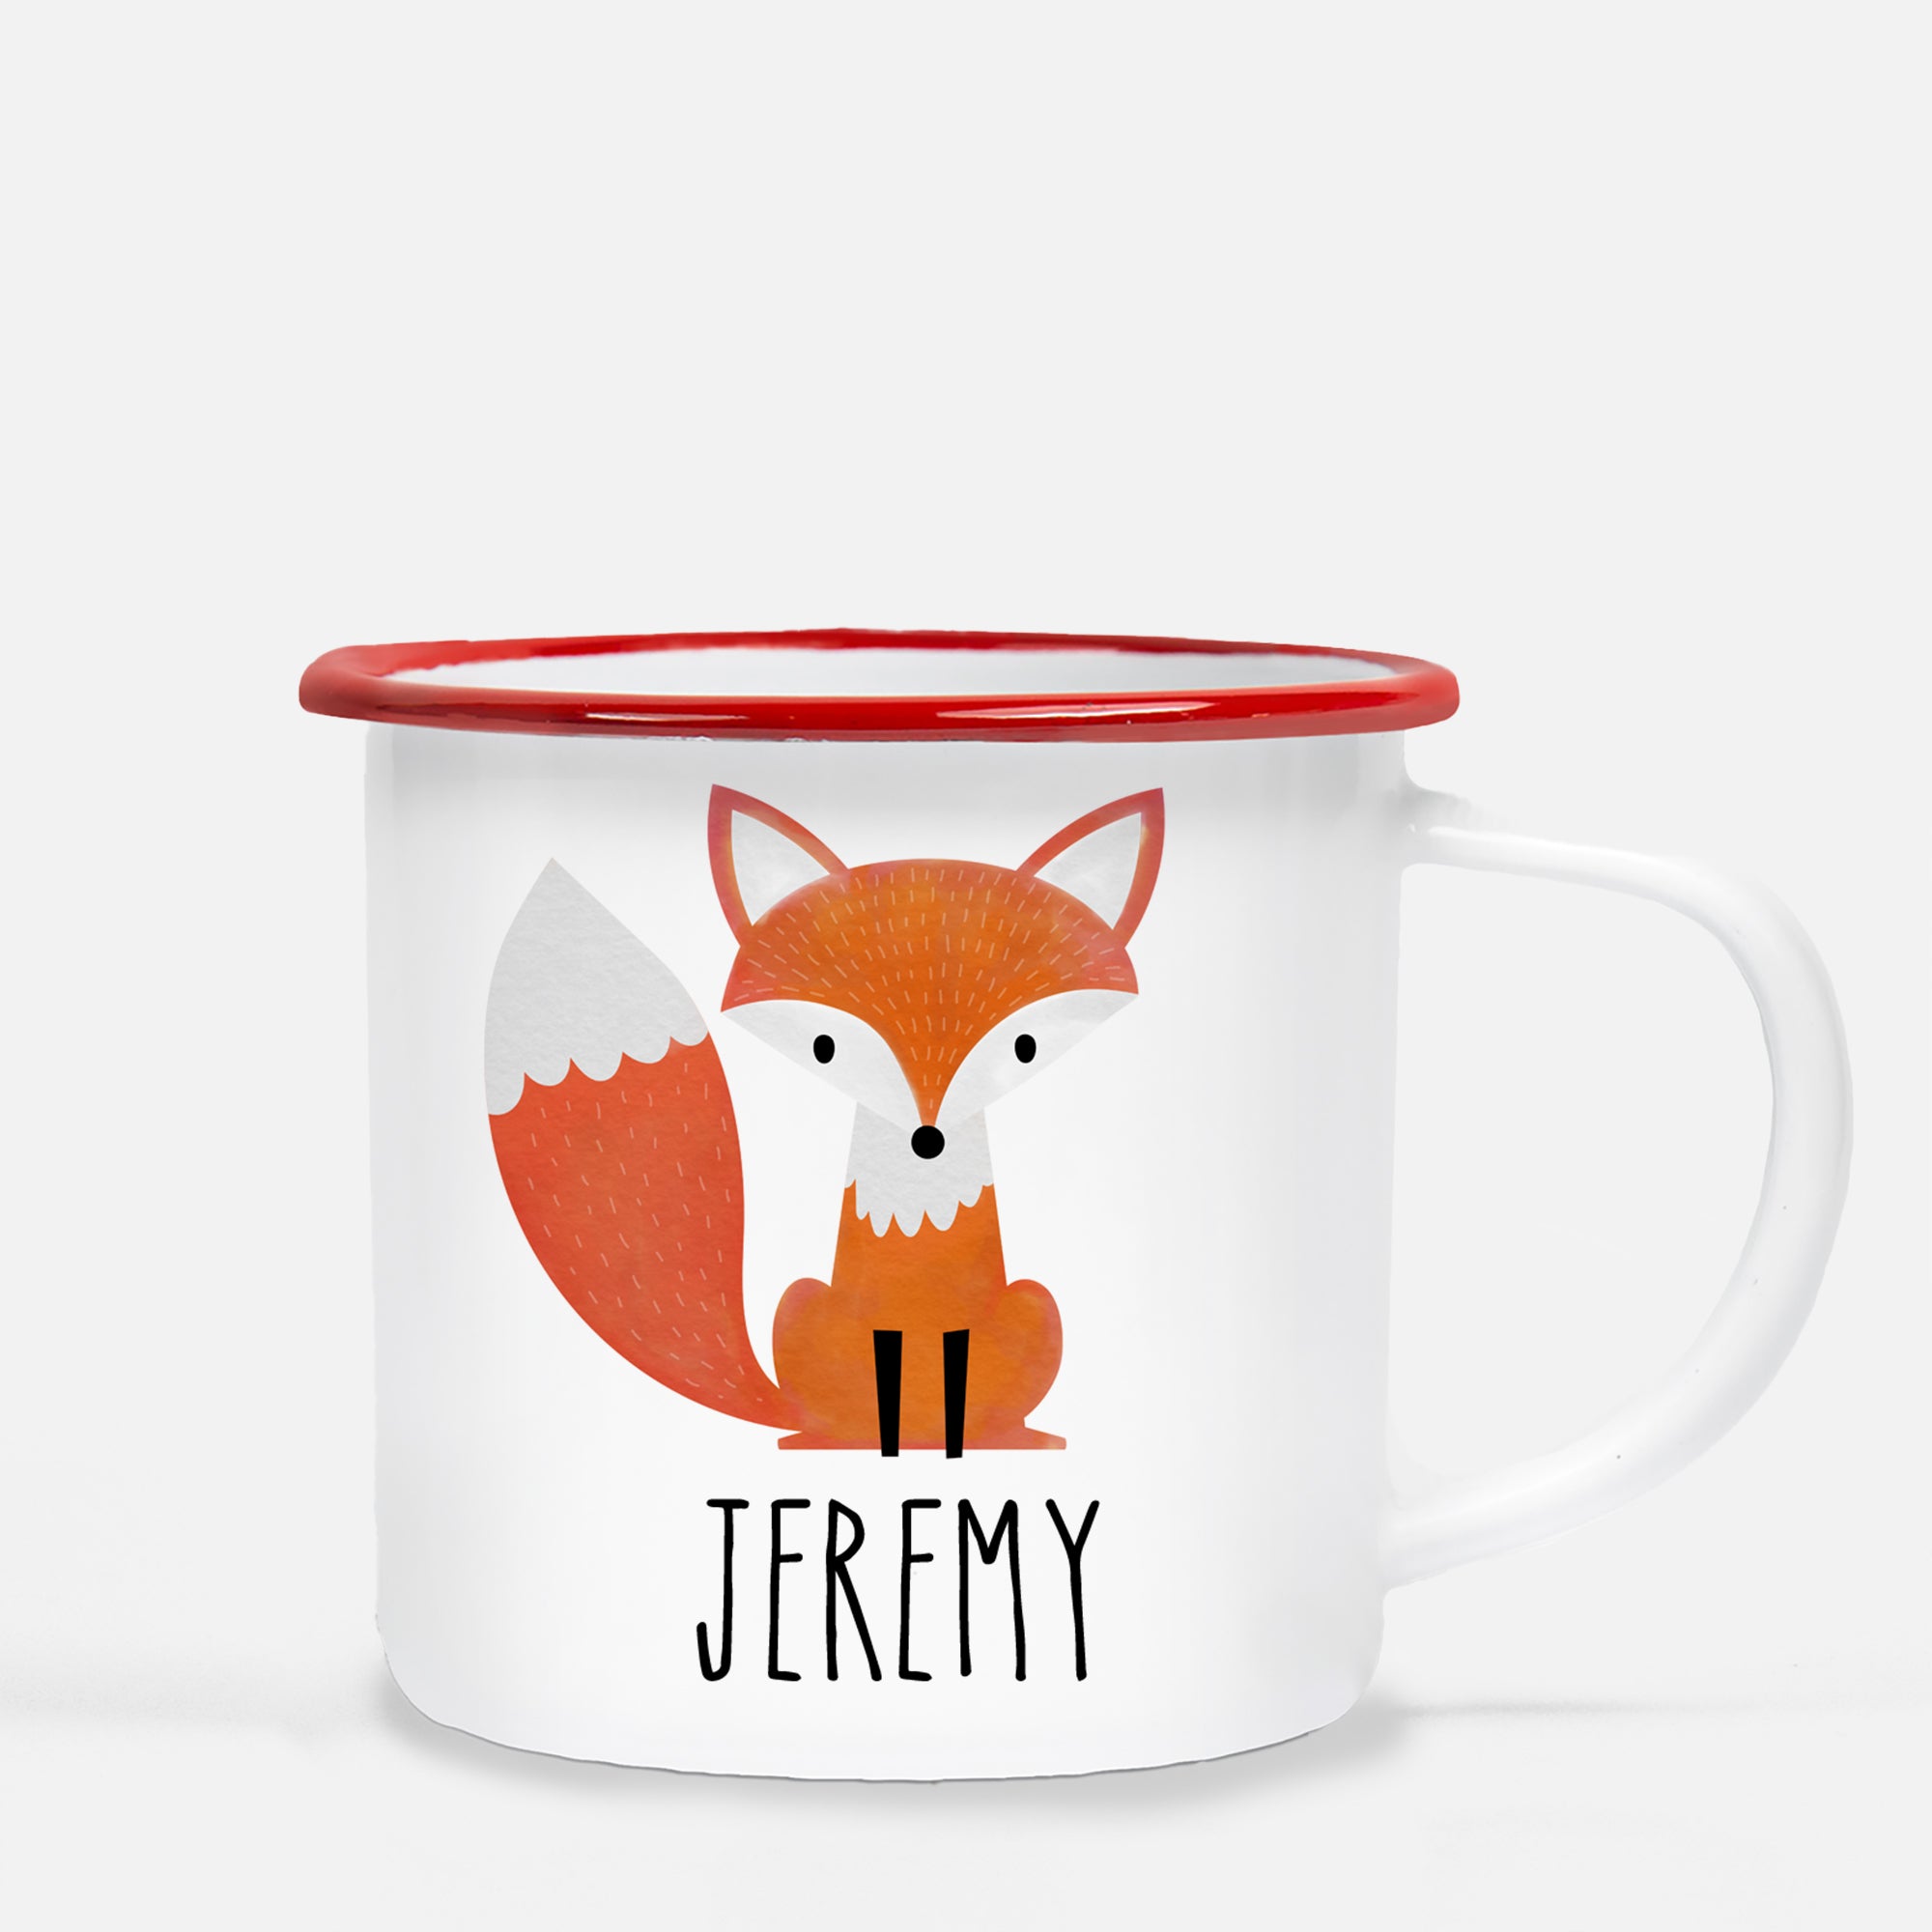 Kids camp mug, personalized with a sweet fox. red lip